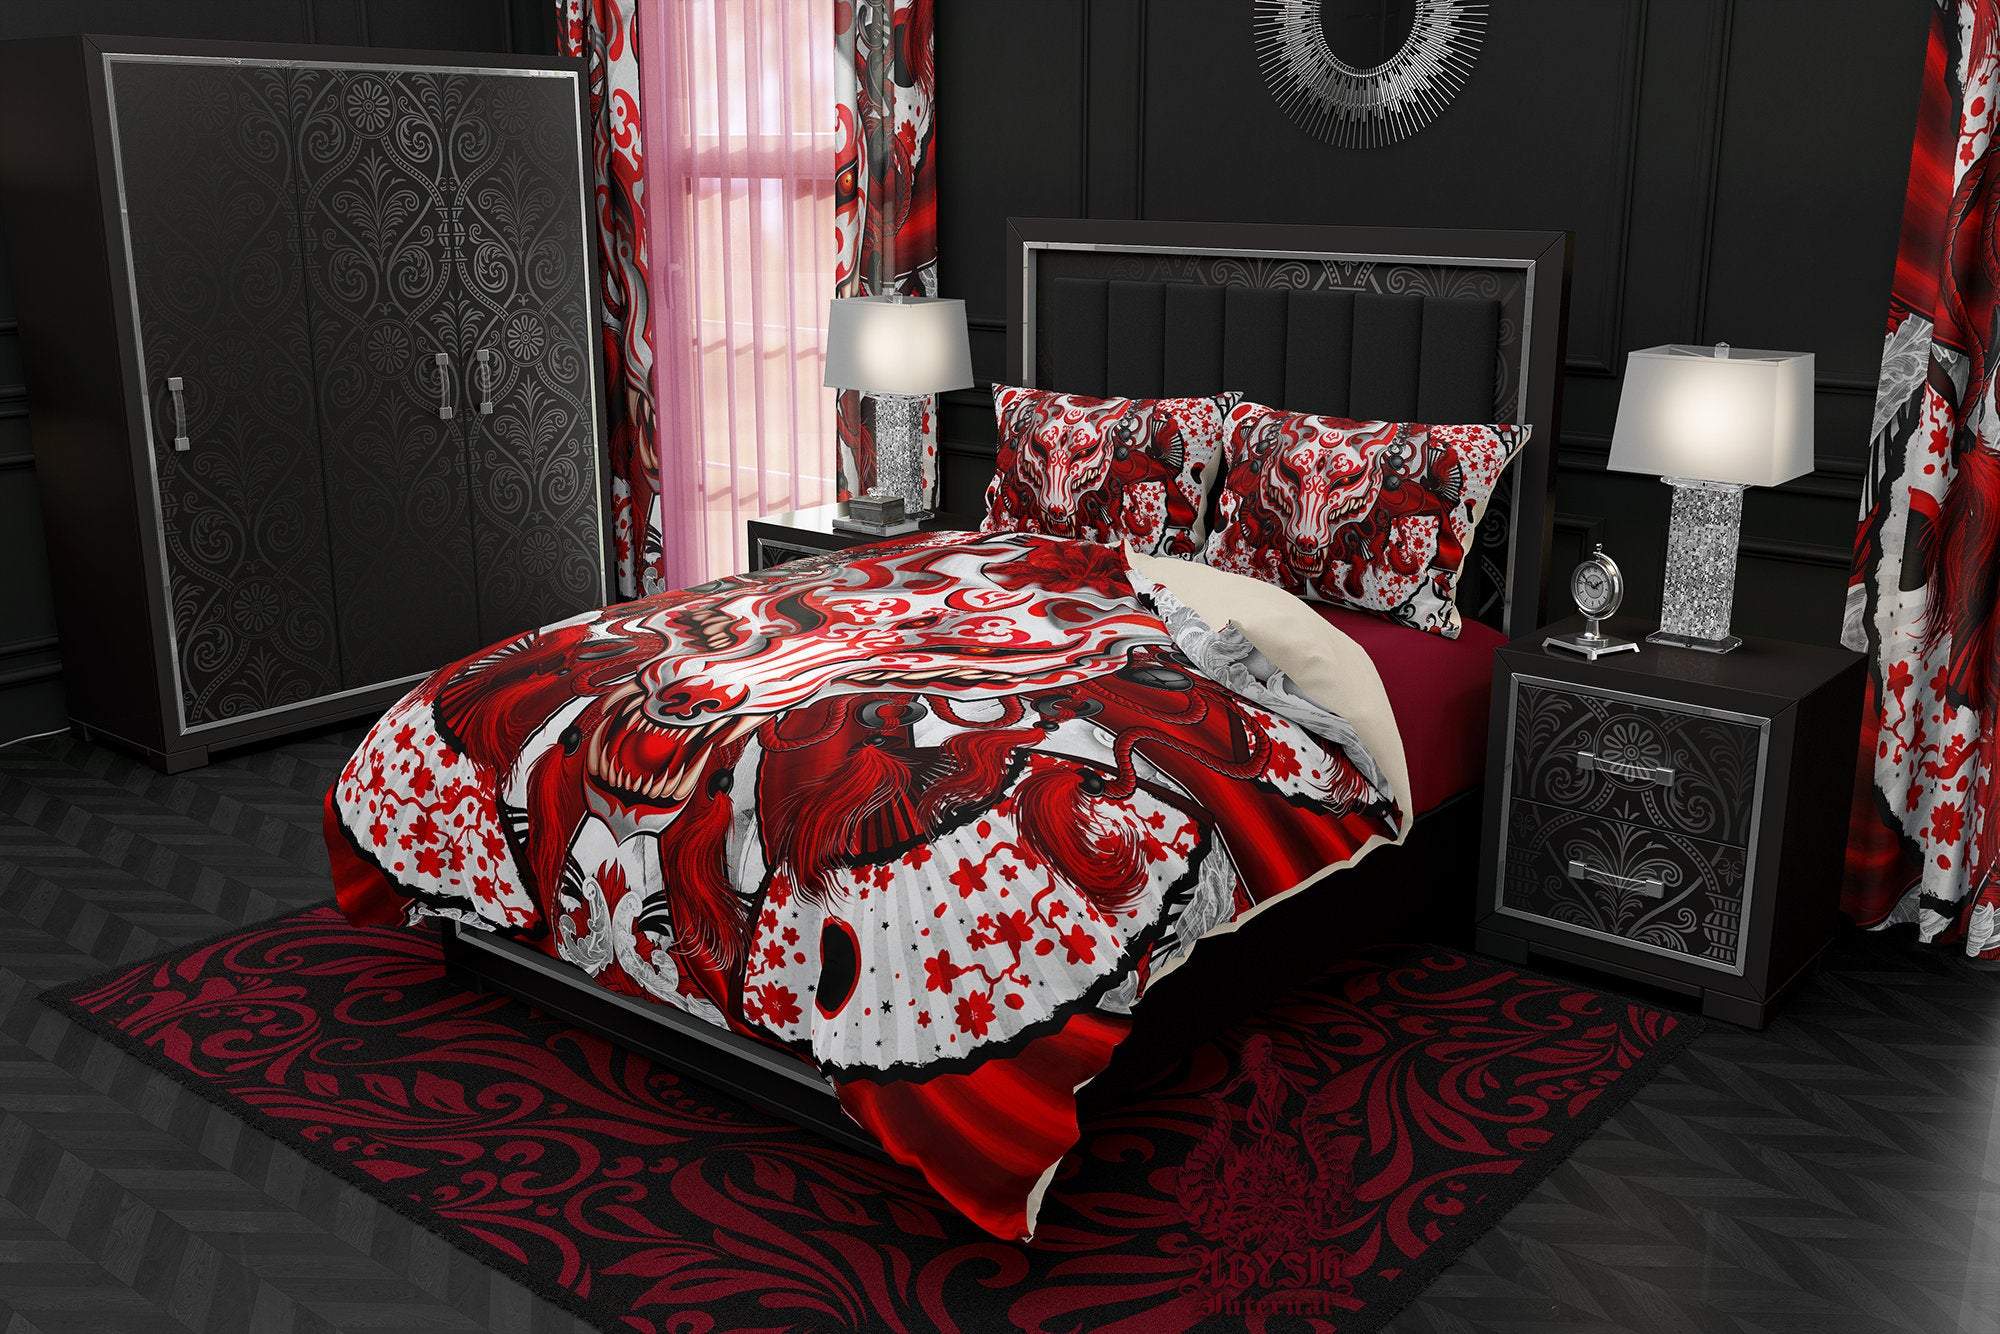 Kitsune Mask Bedding Set, Comforter and Duvet, Gamer Bed Cover and Bedroom Decor, Fox Okami, Anime Art, King, Queen and Twin Size - Bloody White Goth - Abysm Internal